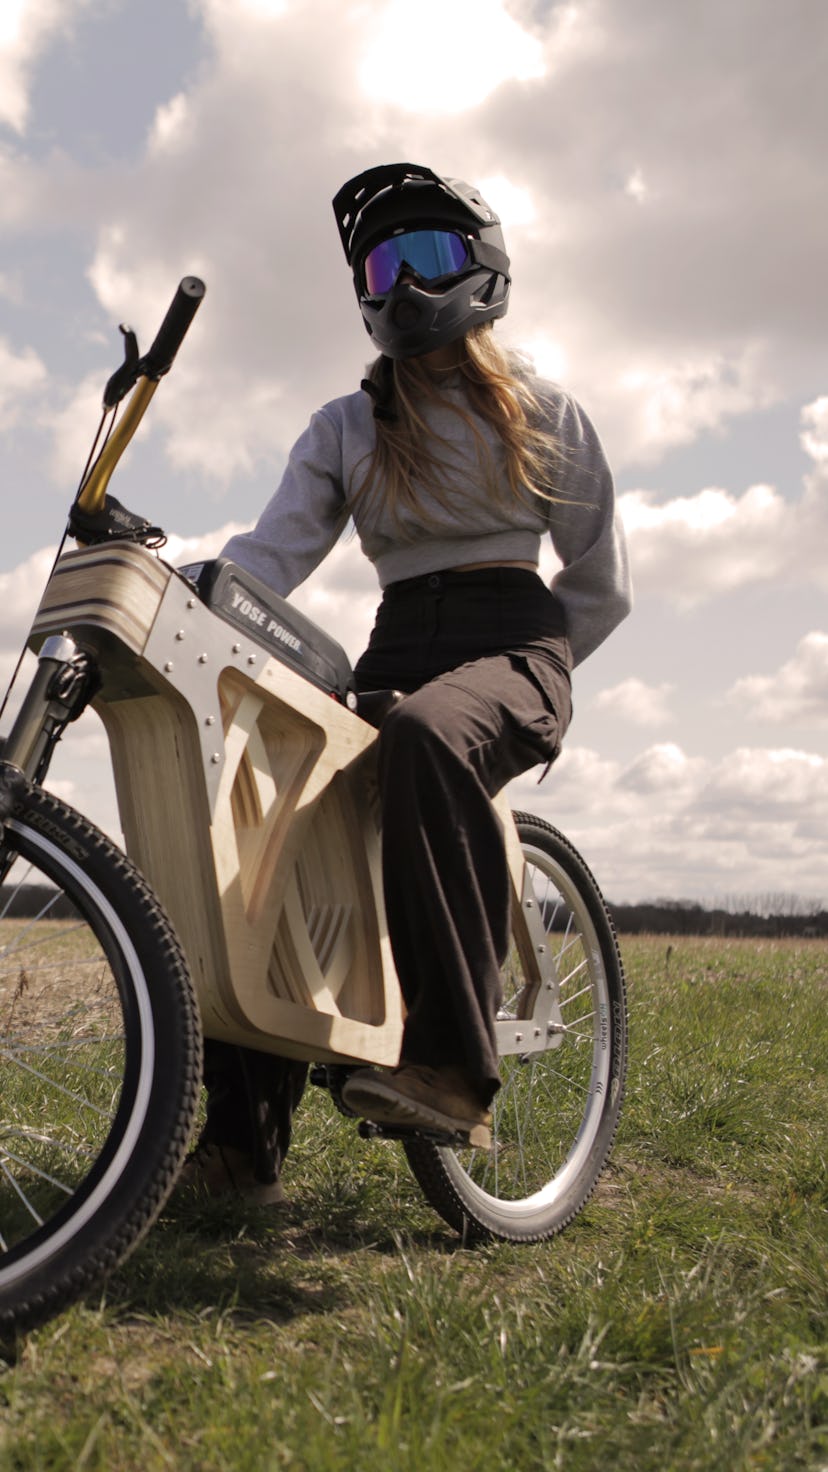 A high-res image of Electraply, a wooden electric bike made by mode maker, Evie Bee. Electric vehicl...